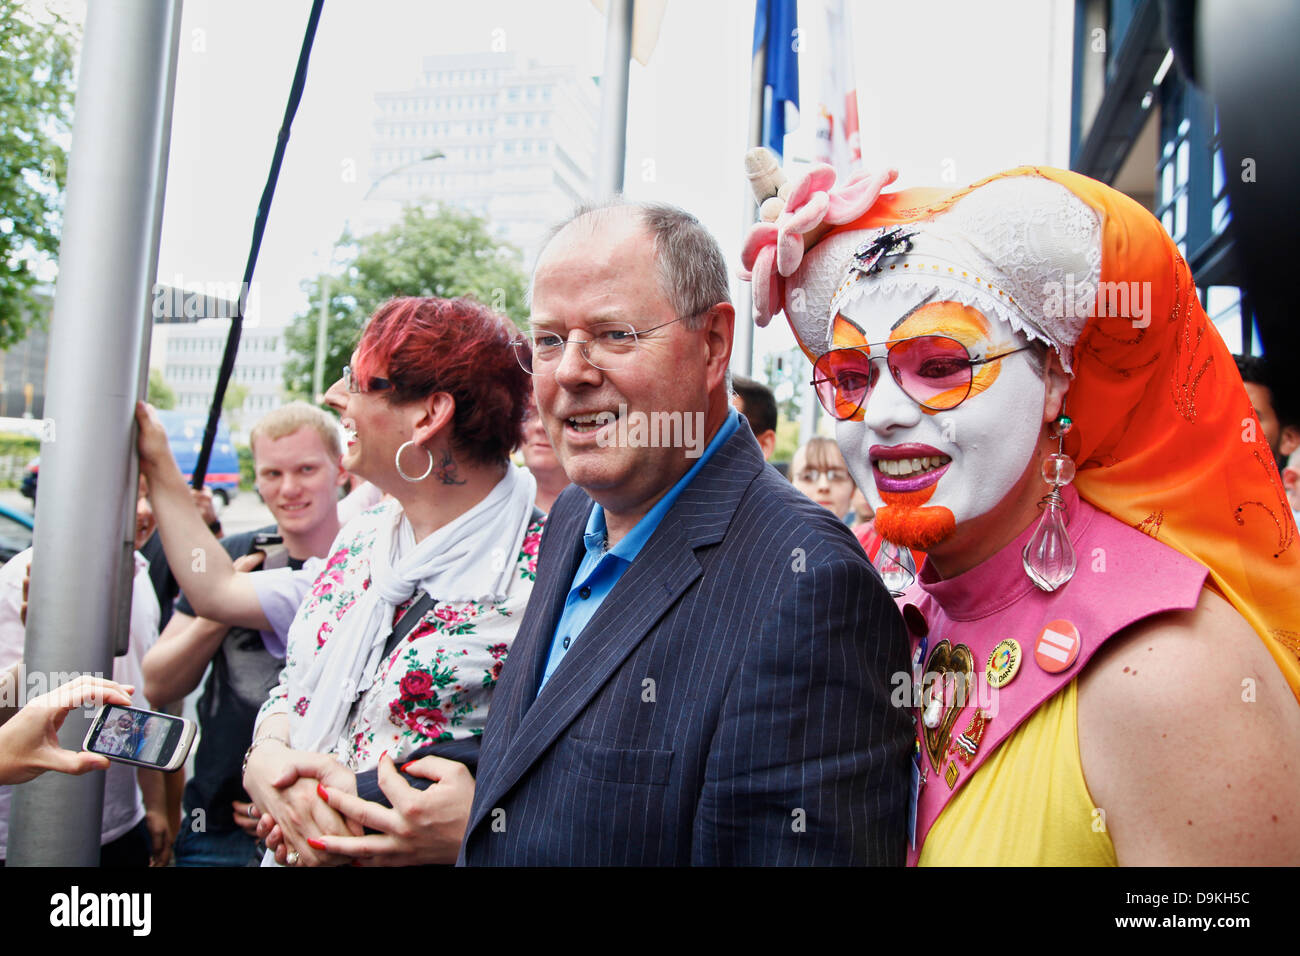 Germany, Berlin. 21th Juni, 2013. Peer Steinbrück, SPD chancellor candidate for the elections of 2013, hoist the rainbow flag, as tradition, during the CSD reception of Schwusos one day before Christopher-Street-Day-Parade in front of the Willy-Brandt-Haus in Berlin. Picture: Peer Steinbr?ck, SPD chancellor candidate, after hoisting of the rainbow flag at Willy-Brandt-Haus in Berlin. Stock Photo